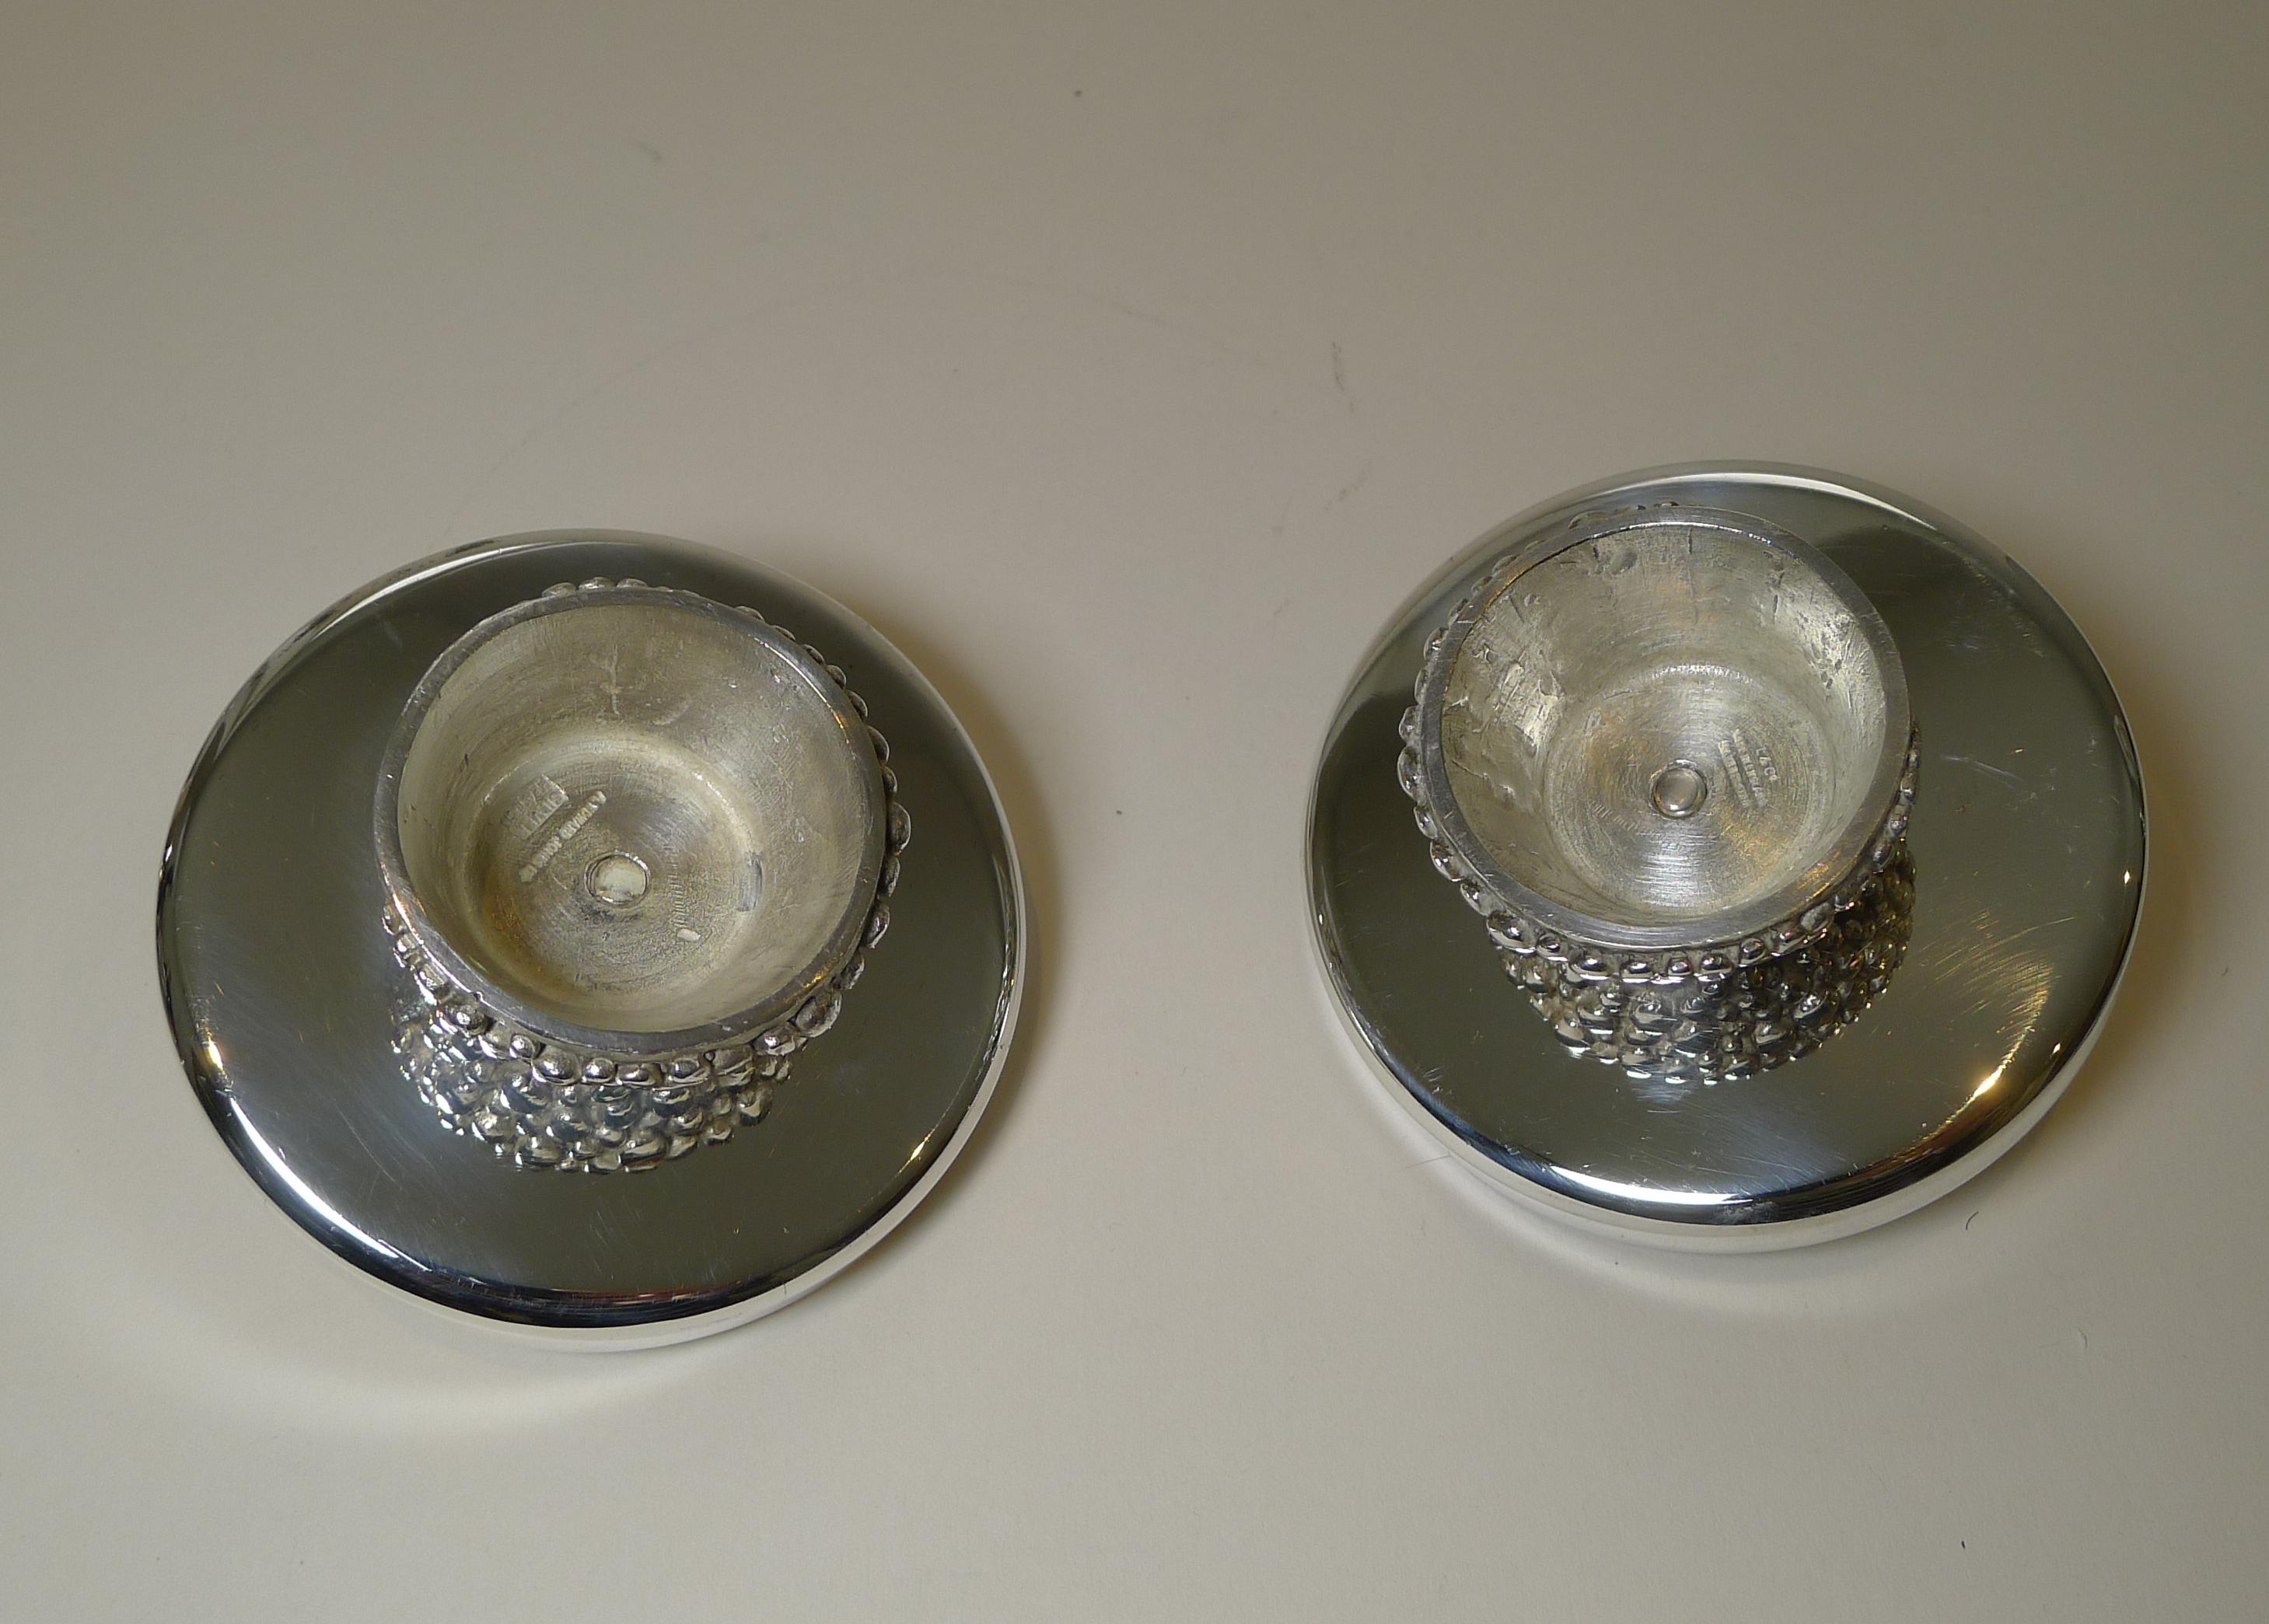 Liberty & Co., Pair Modernist Silver Plated Candlesticks, c. 1950 / 1960 For Sale 6